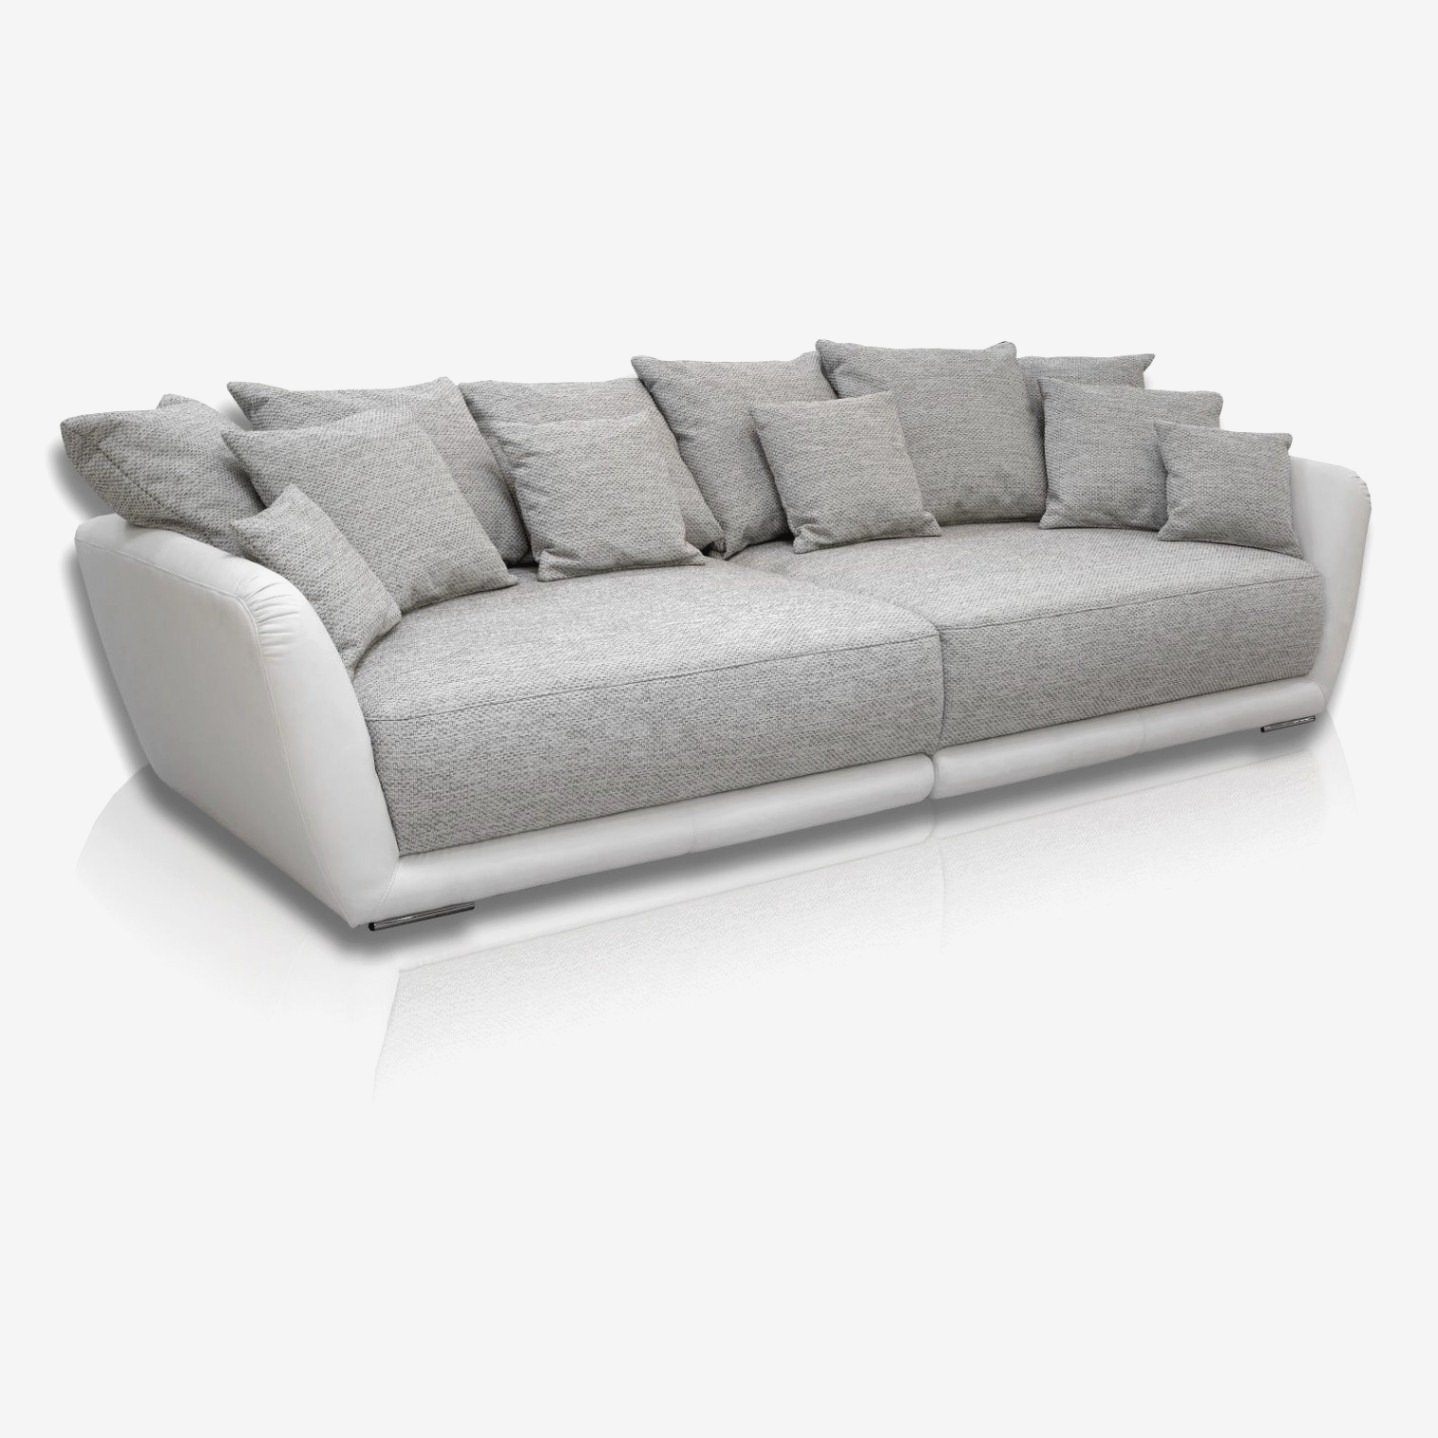 Lit Rond Ikea Luxe Futon sofa Bed